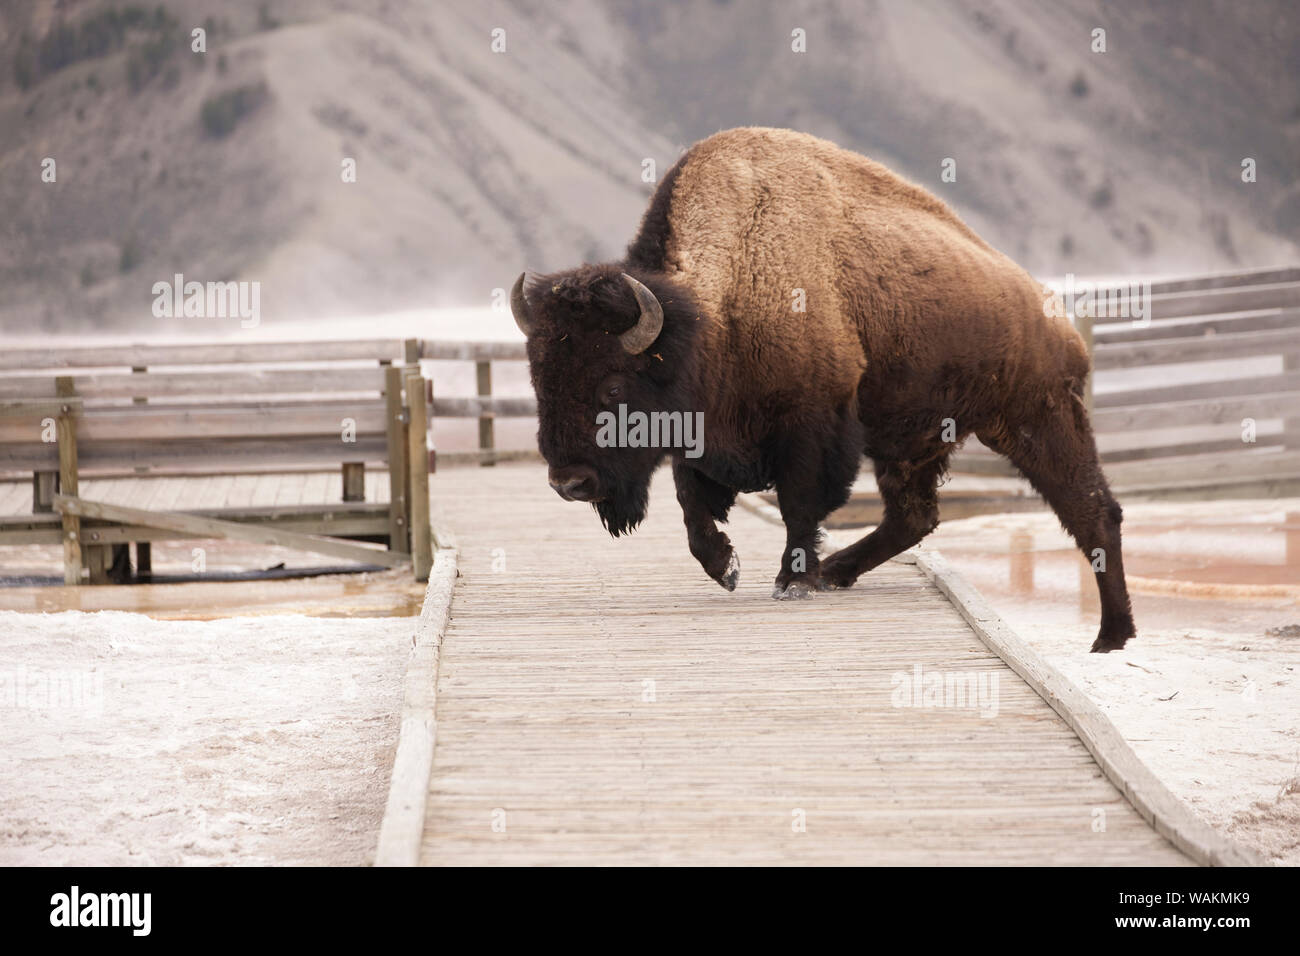 Yellowstone National Park, Wyoming, USA. Bison climbing on boardwalk in calcium carbonate deposits in Mammoth Hot Springs. Stock Photo